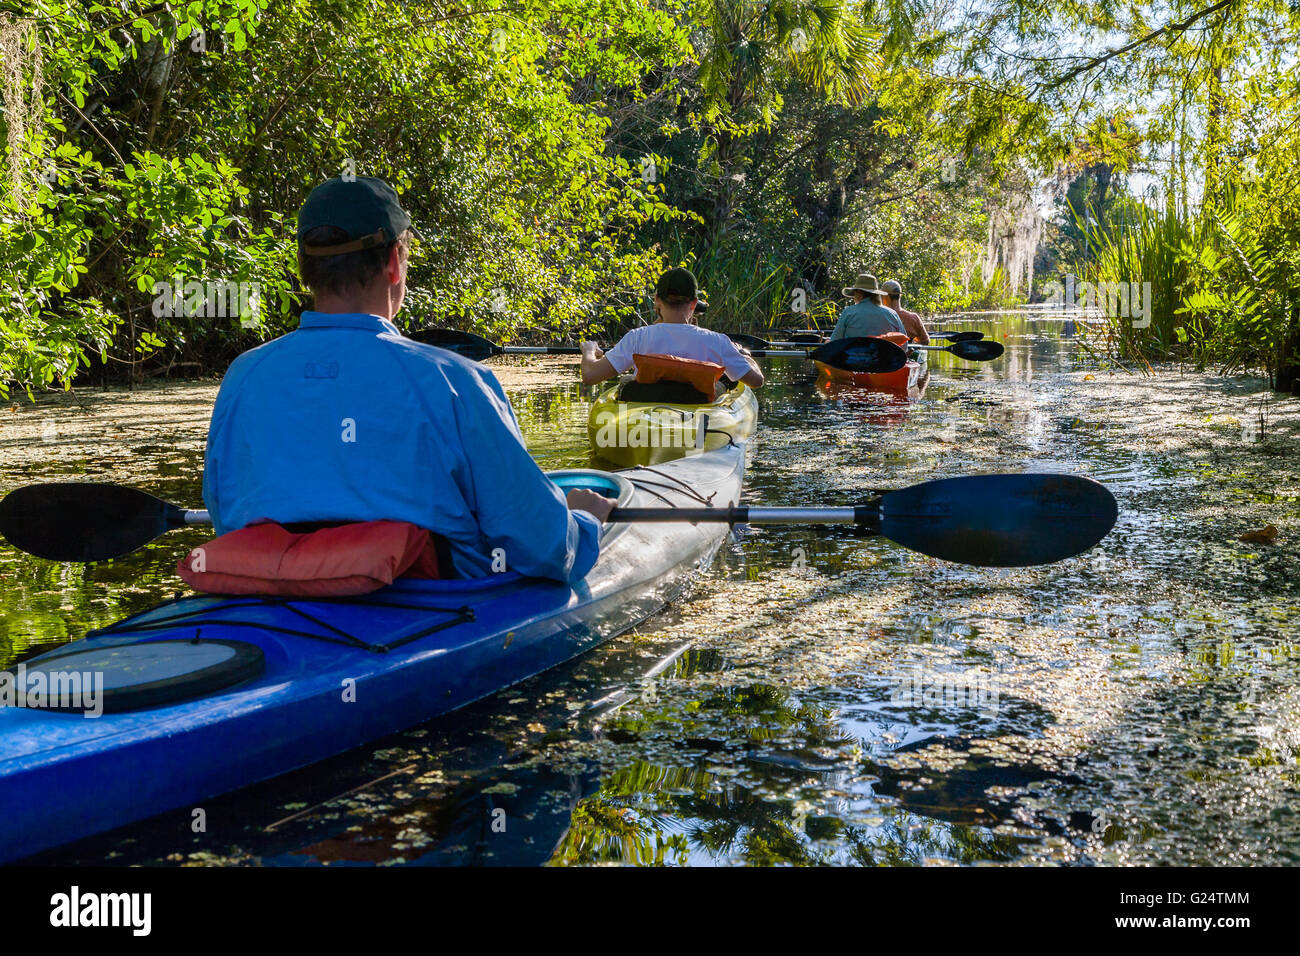 A group of paddlers in kayaks on a river in the everglades. Stock Photo